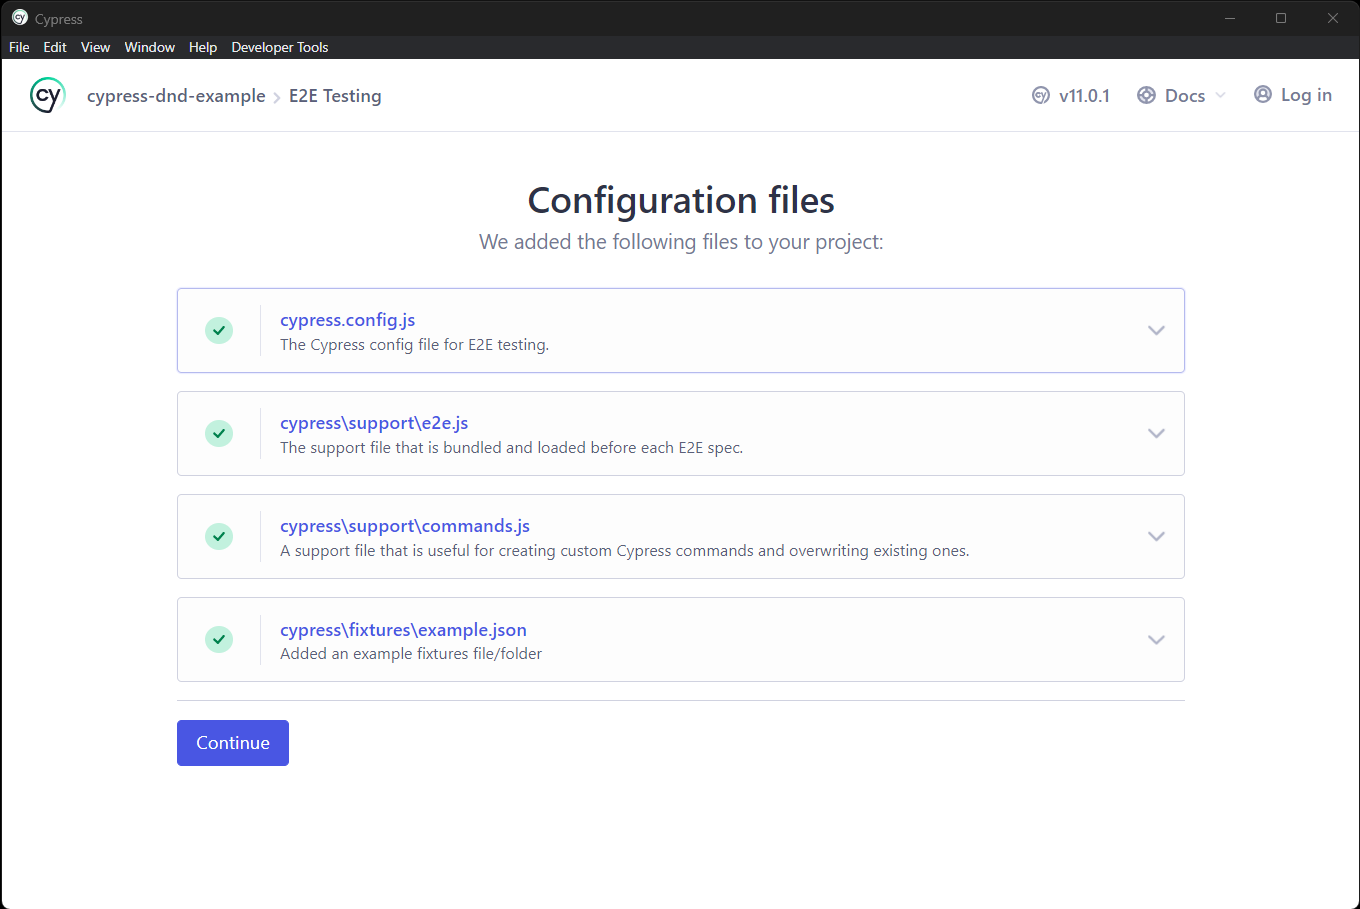 The Cypress configuration file screen